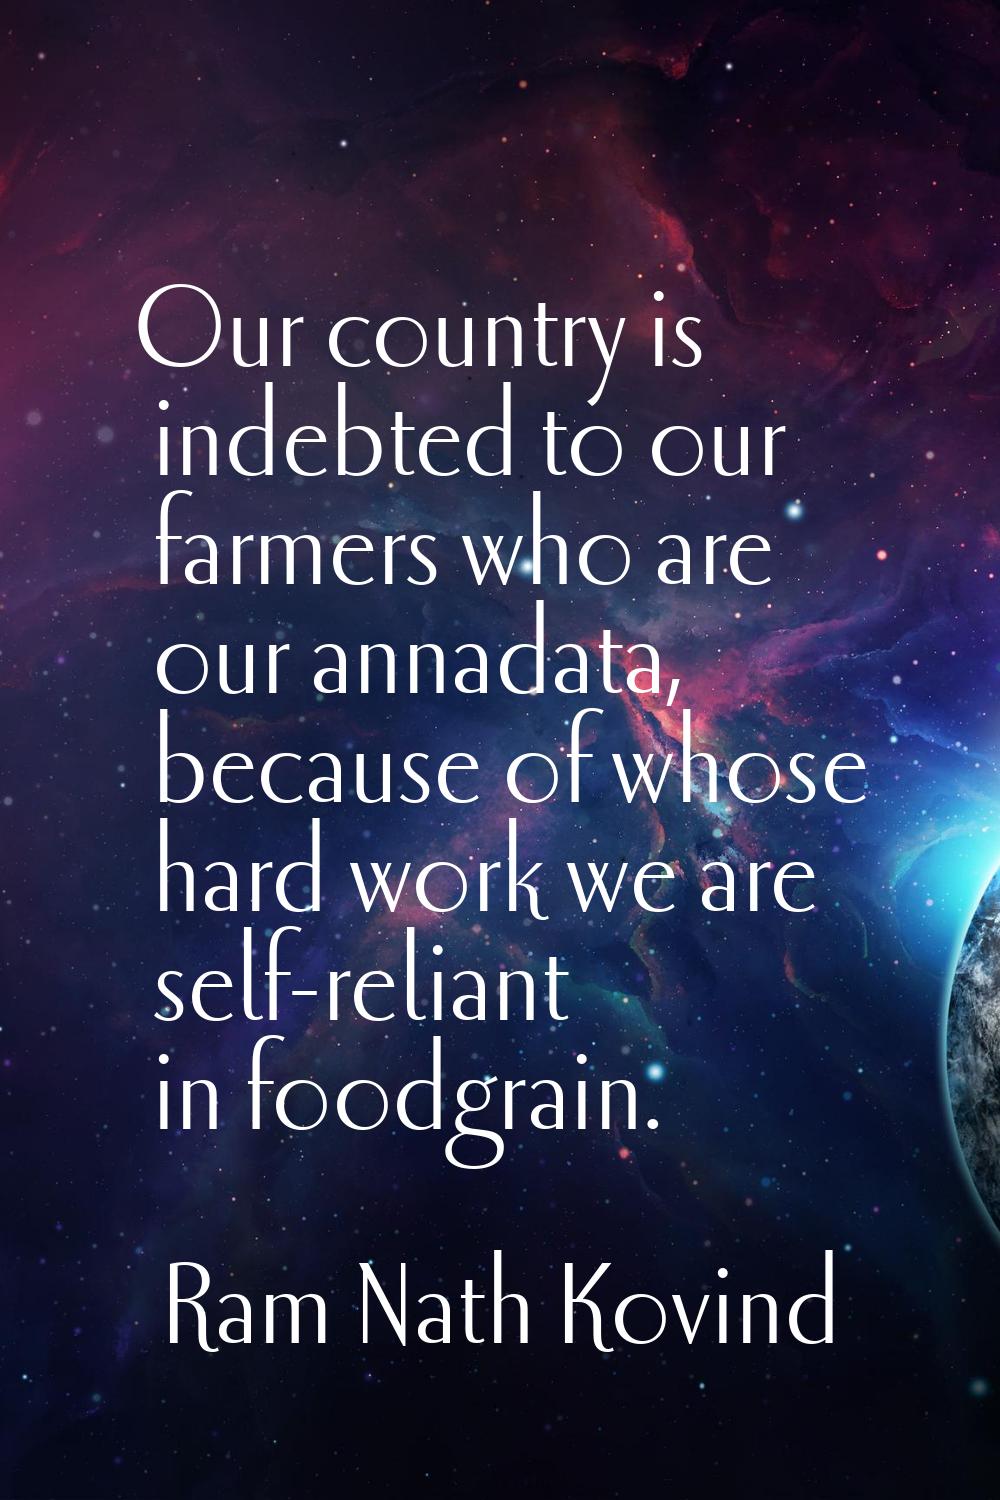 Our country is indebted to our farmers who are our annadata, because of whose hard work we are self